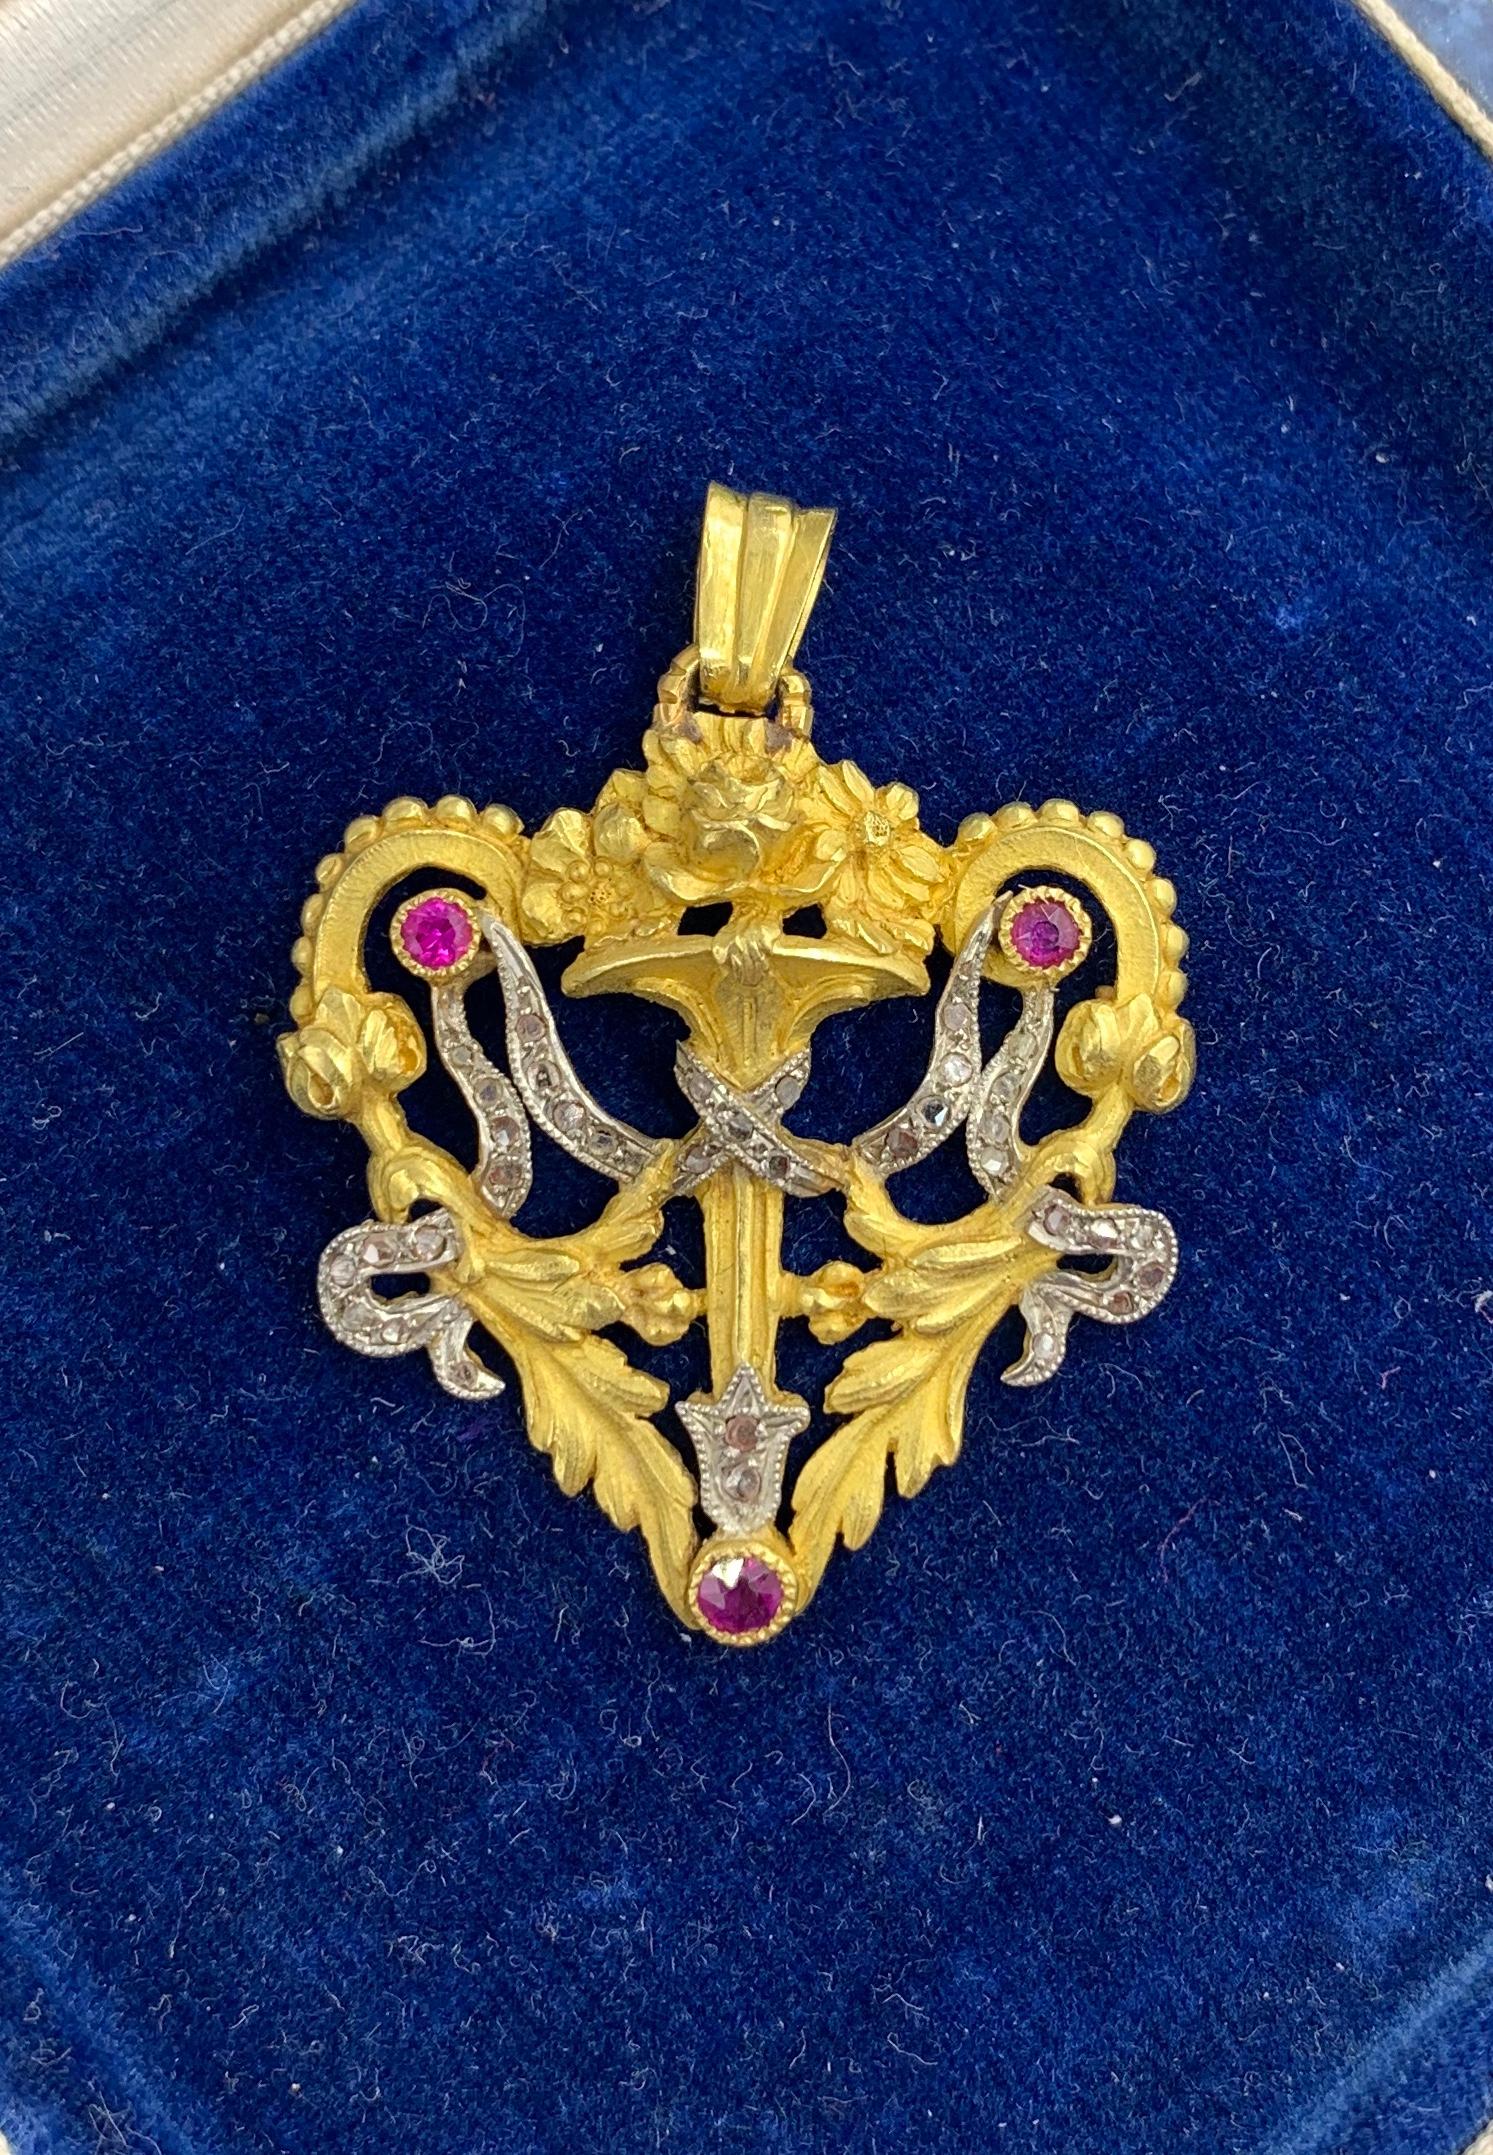 This is a stunning and rare antique Heart motif French Belle Epoque Rose Cut Diamond and Ruby 18 Karat Gold Pendant Necklace.   The gorgeous heart shape pendant has all the elements of the French Napoleon III jewels that we love, the exquisite